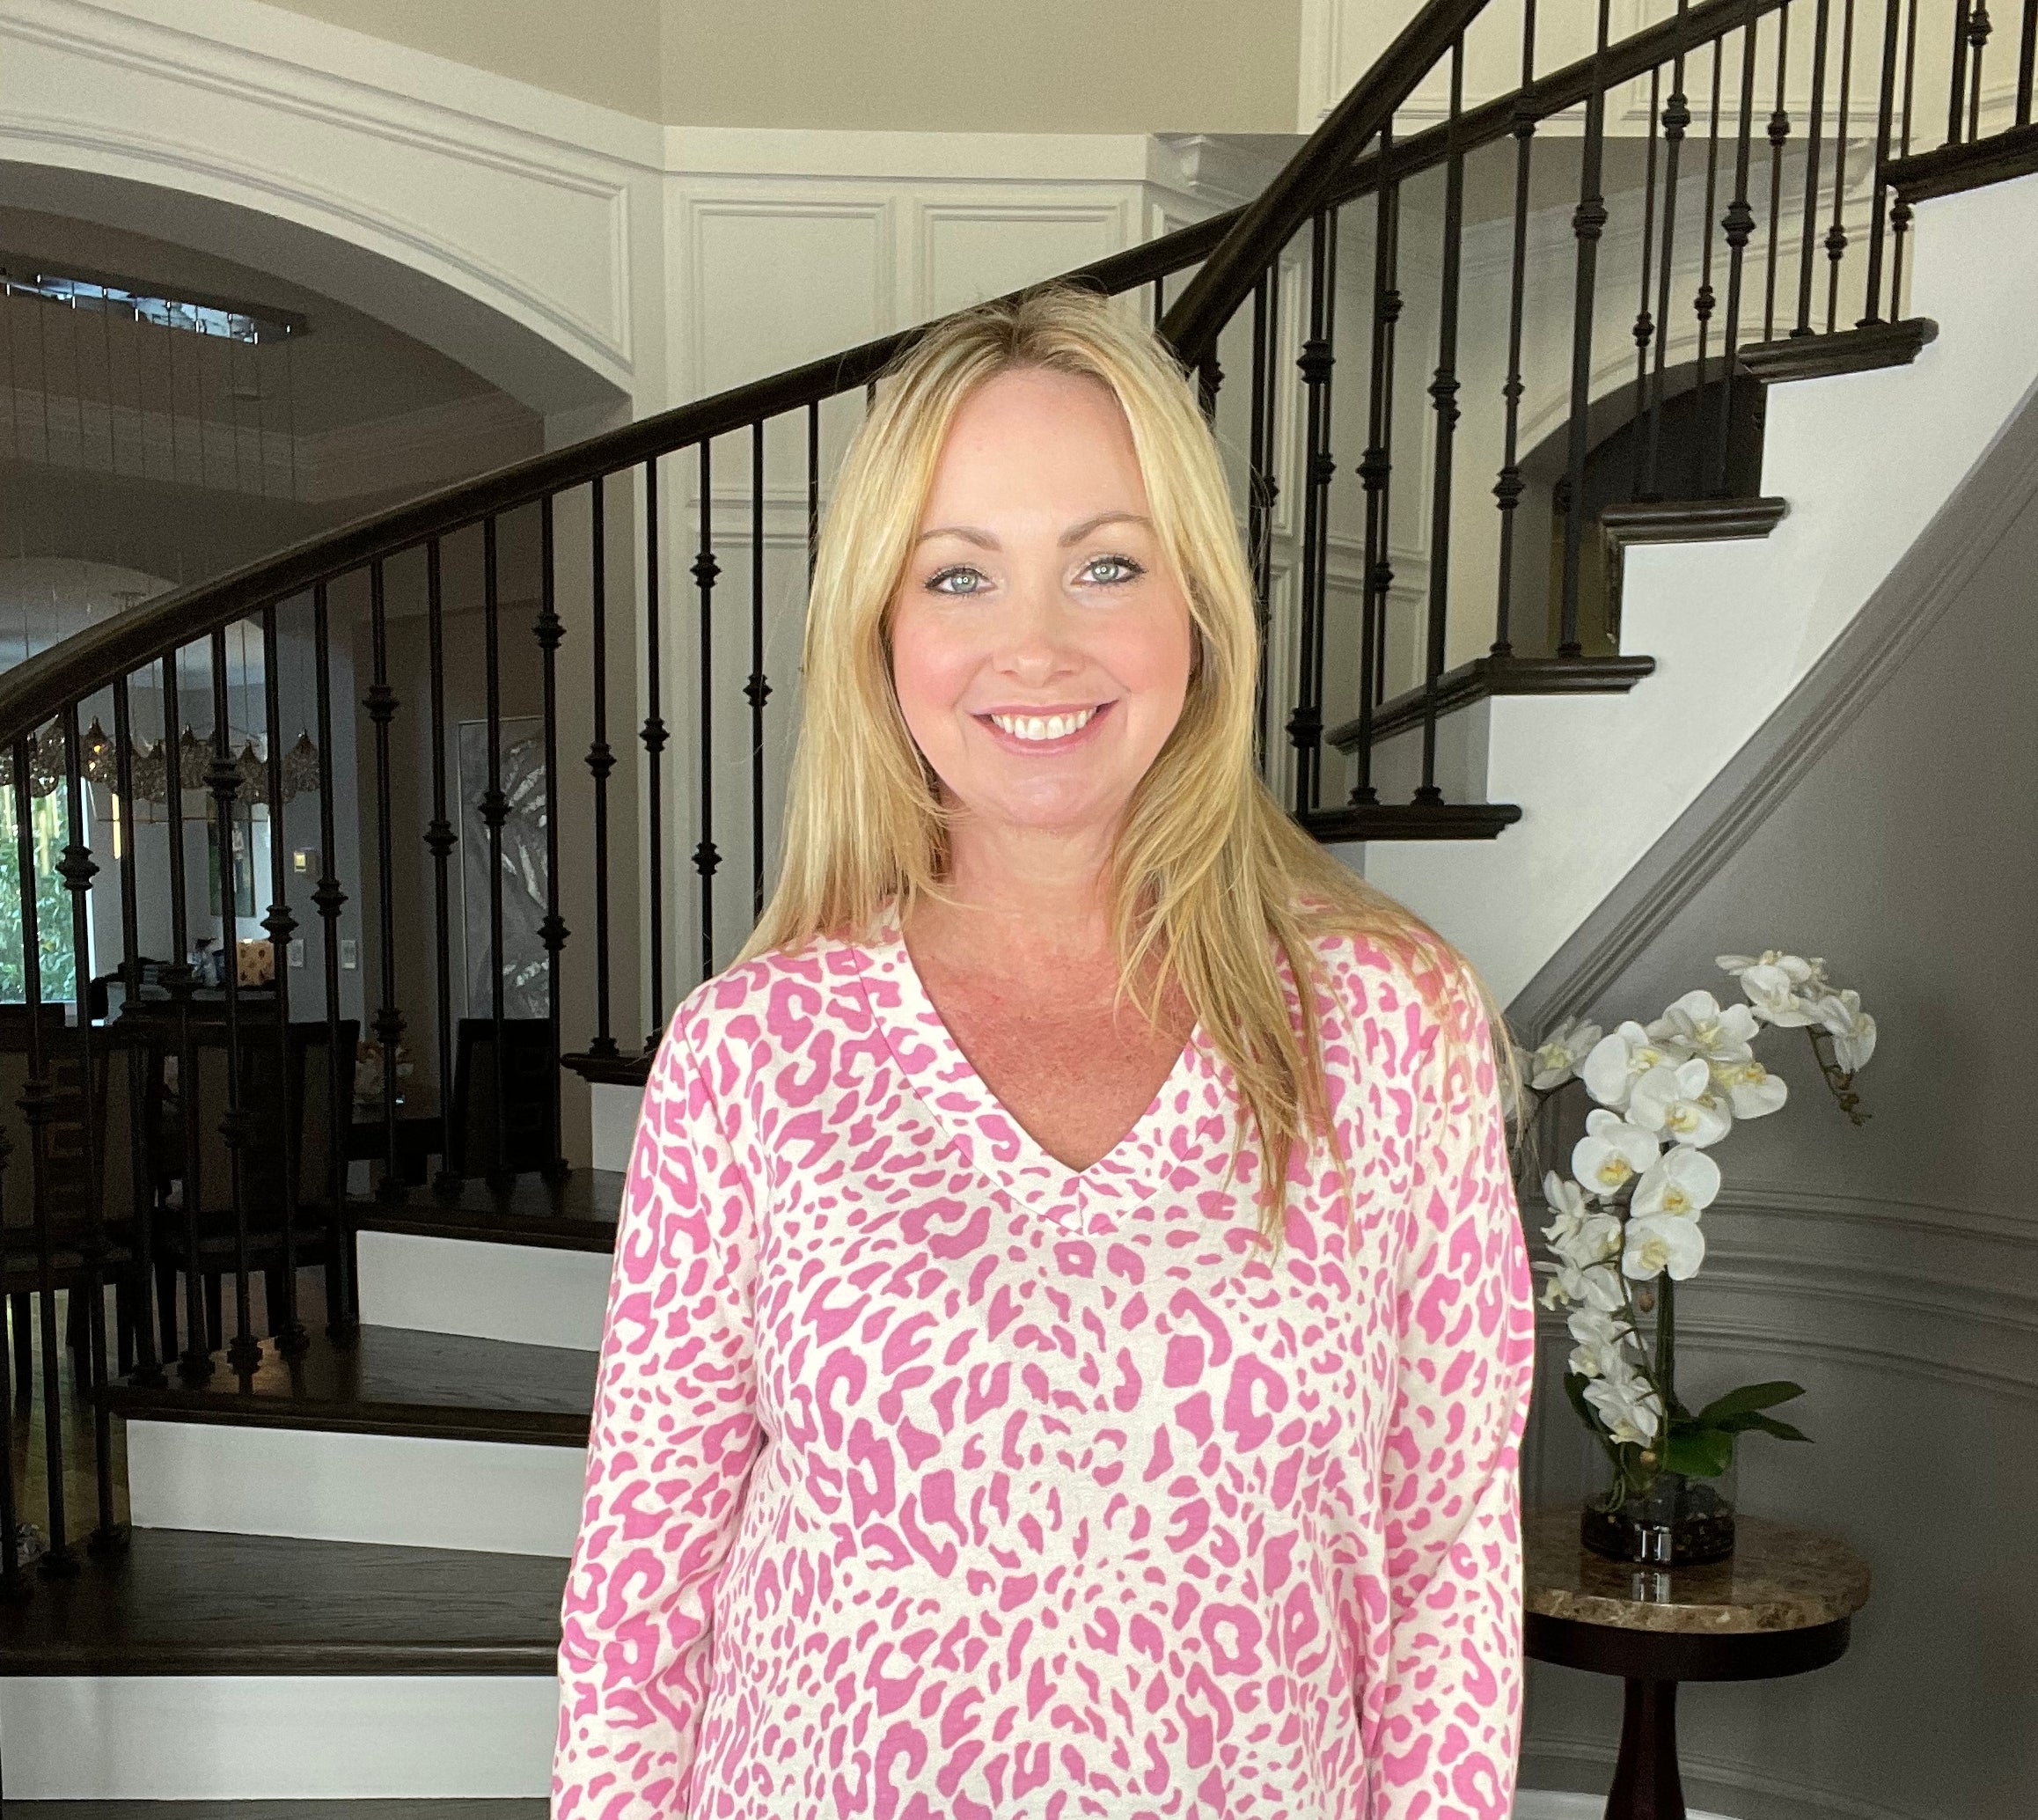 Dear Scarlett Pink Leopard Top-110 Long Sleeves- Simply Simpson's Boutique is a Women's Online Fashion Boutique Located in Jupiter, Florida